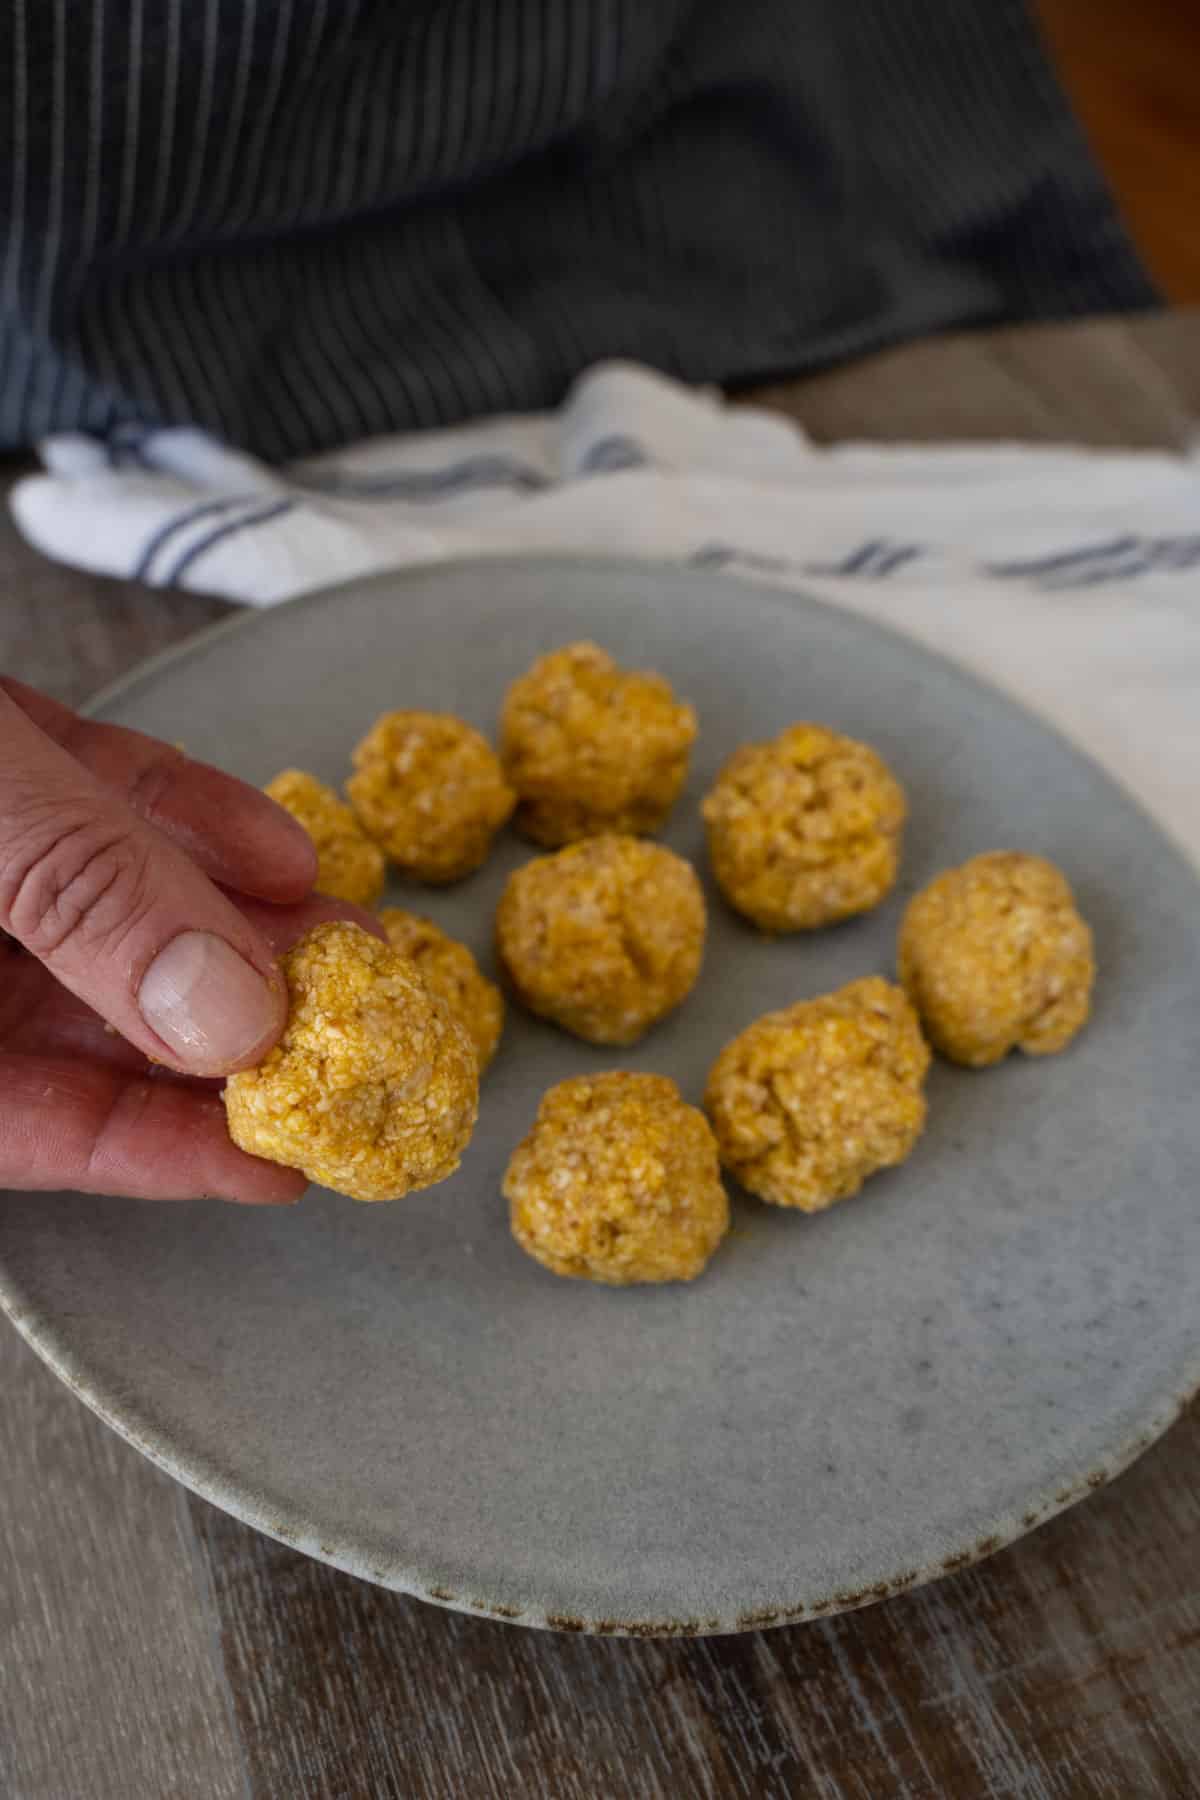 9 matzo balls on a plate with one being held between fingers